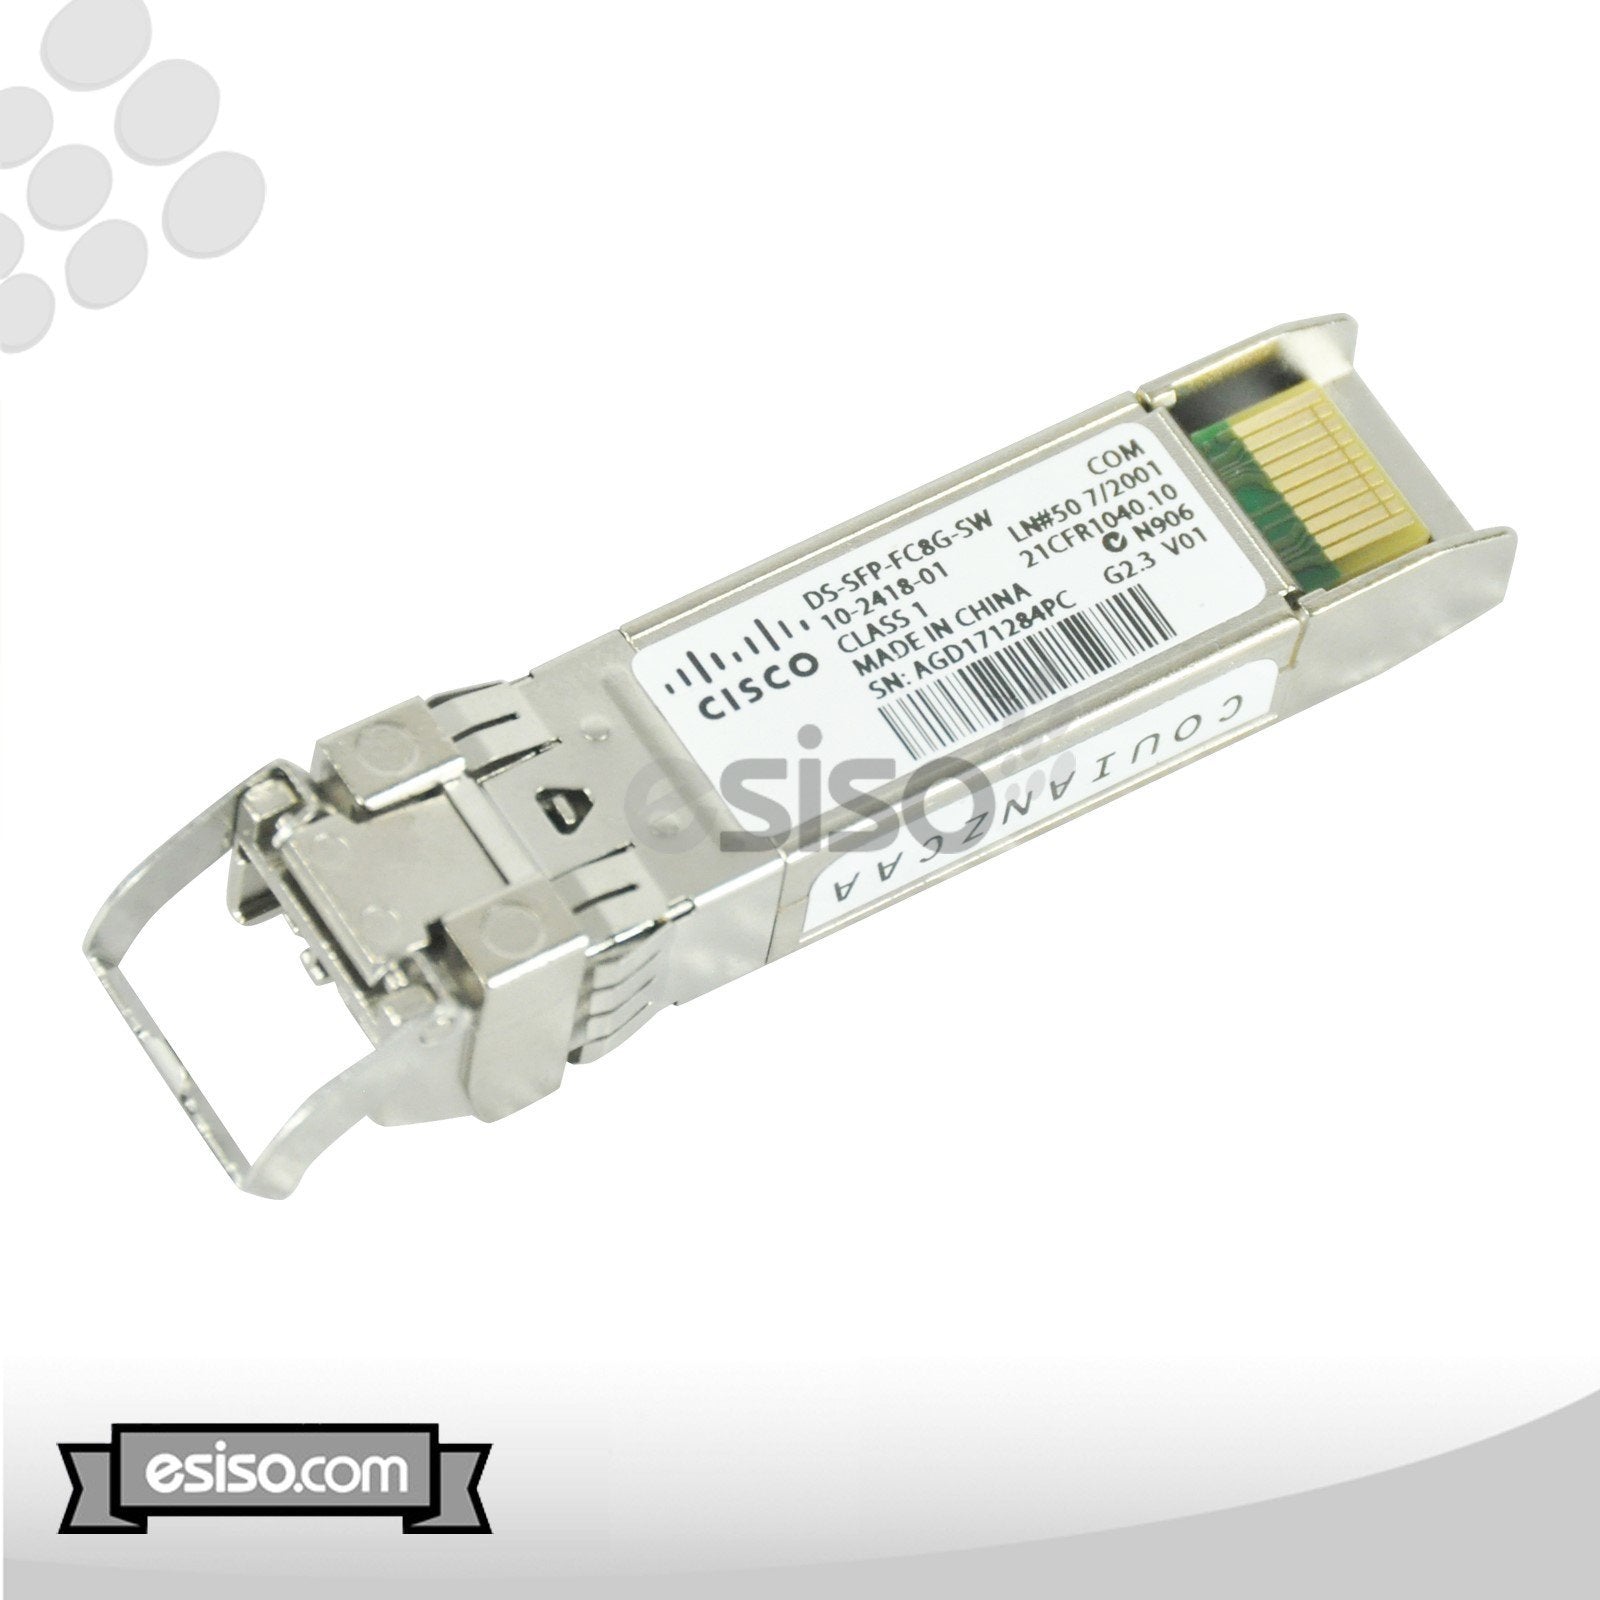 LOT OF 10 DS-SFP-FC8G-SW CISCO 8GBASE-SW SFP+850NM 150M DUPLEX LC MMF TRANSCEIVER